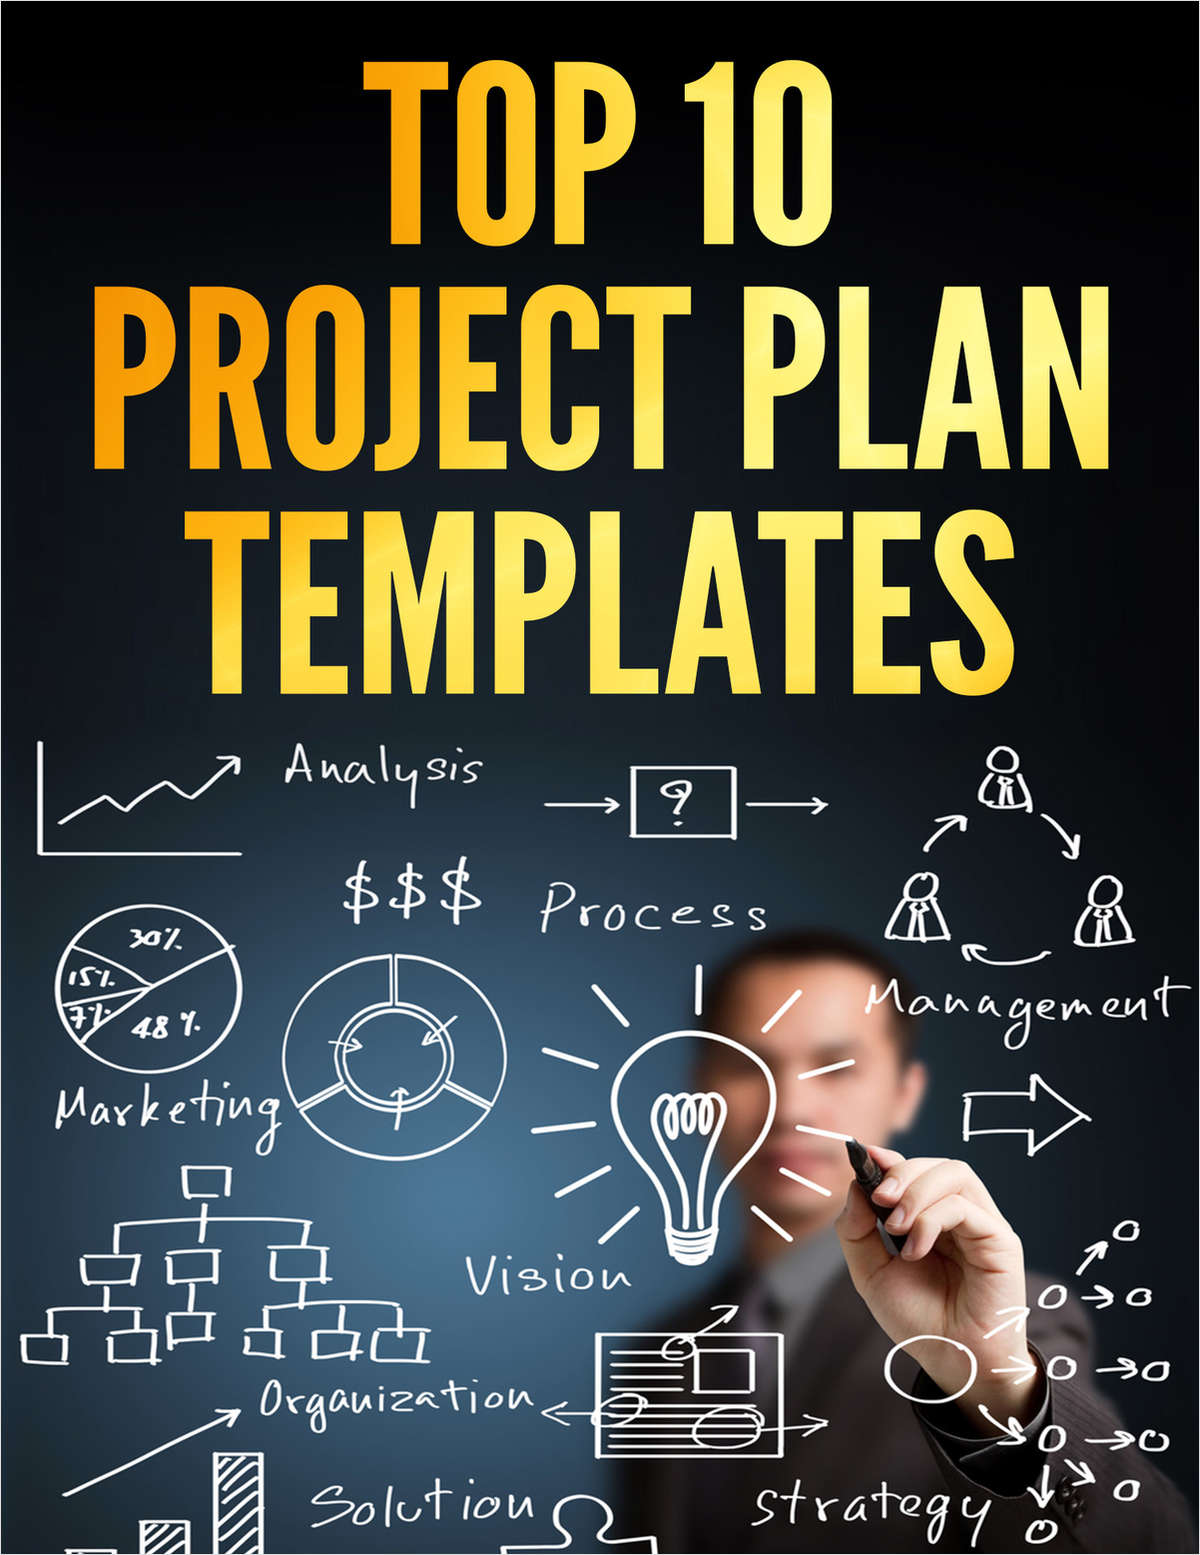 Top 10 Project Plan Templates and Checklists